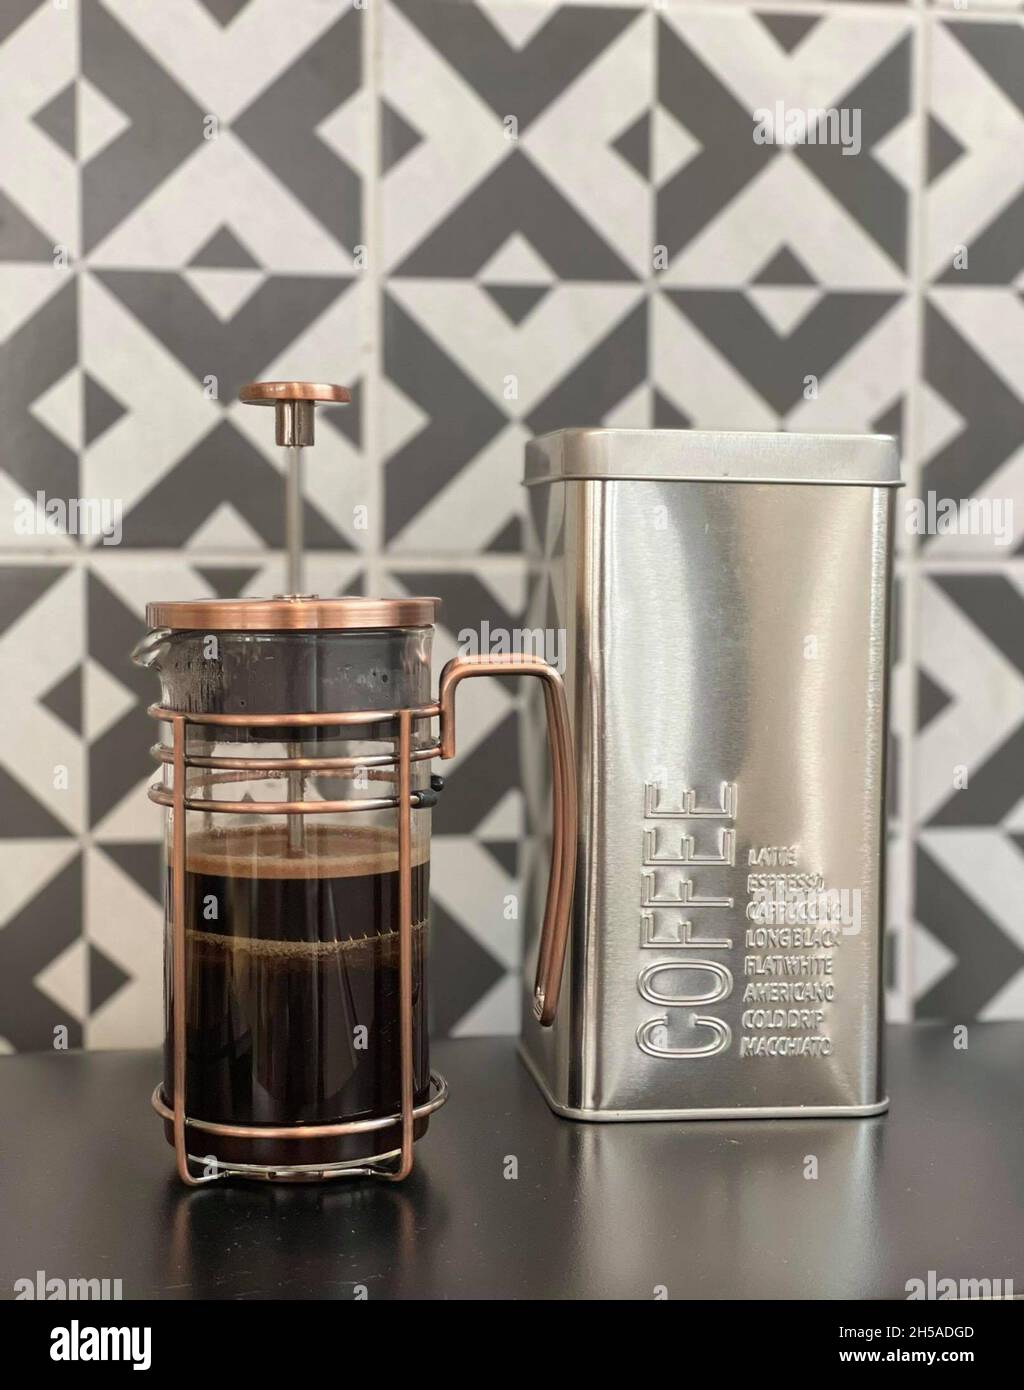 https://c8.alamy.com/comp/2H5ADGD/french-press-with-fresh-coffee-on-a-modern-kitchen-countertop-2H5ADGD.jpg